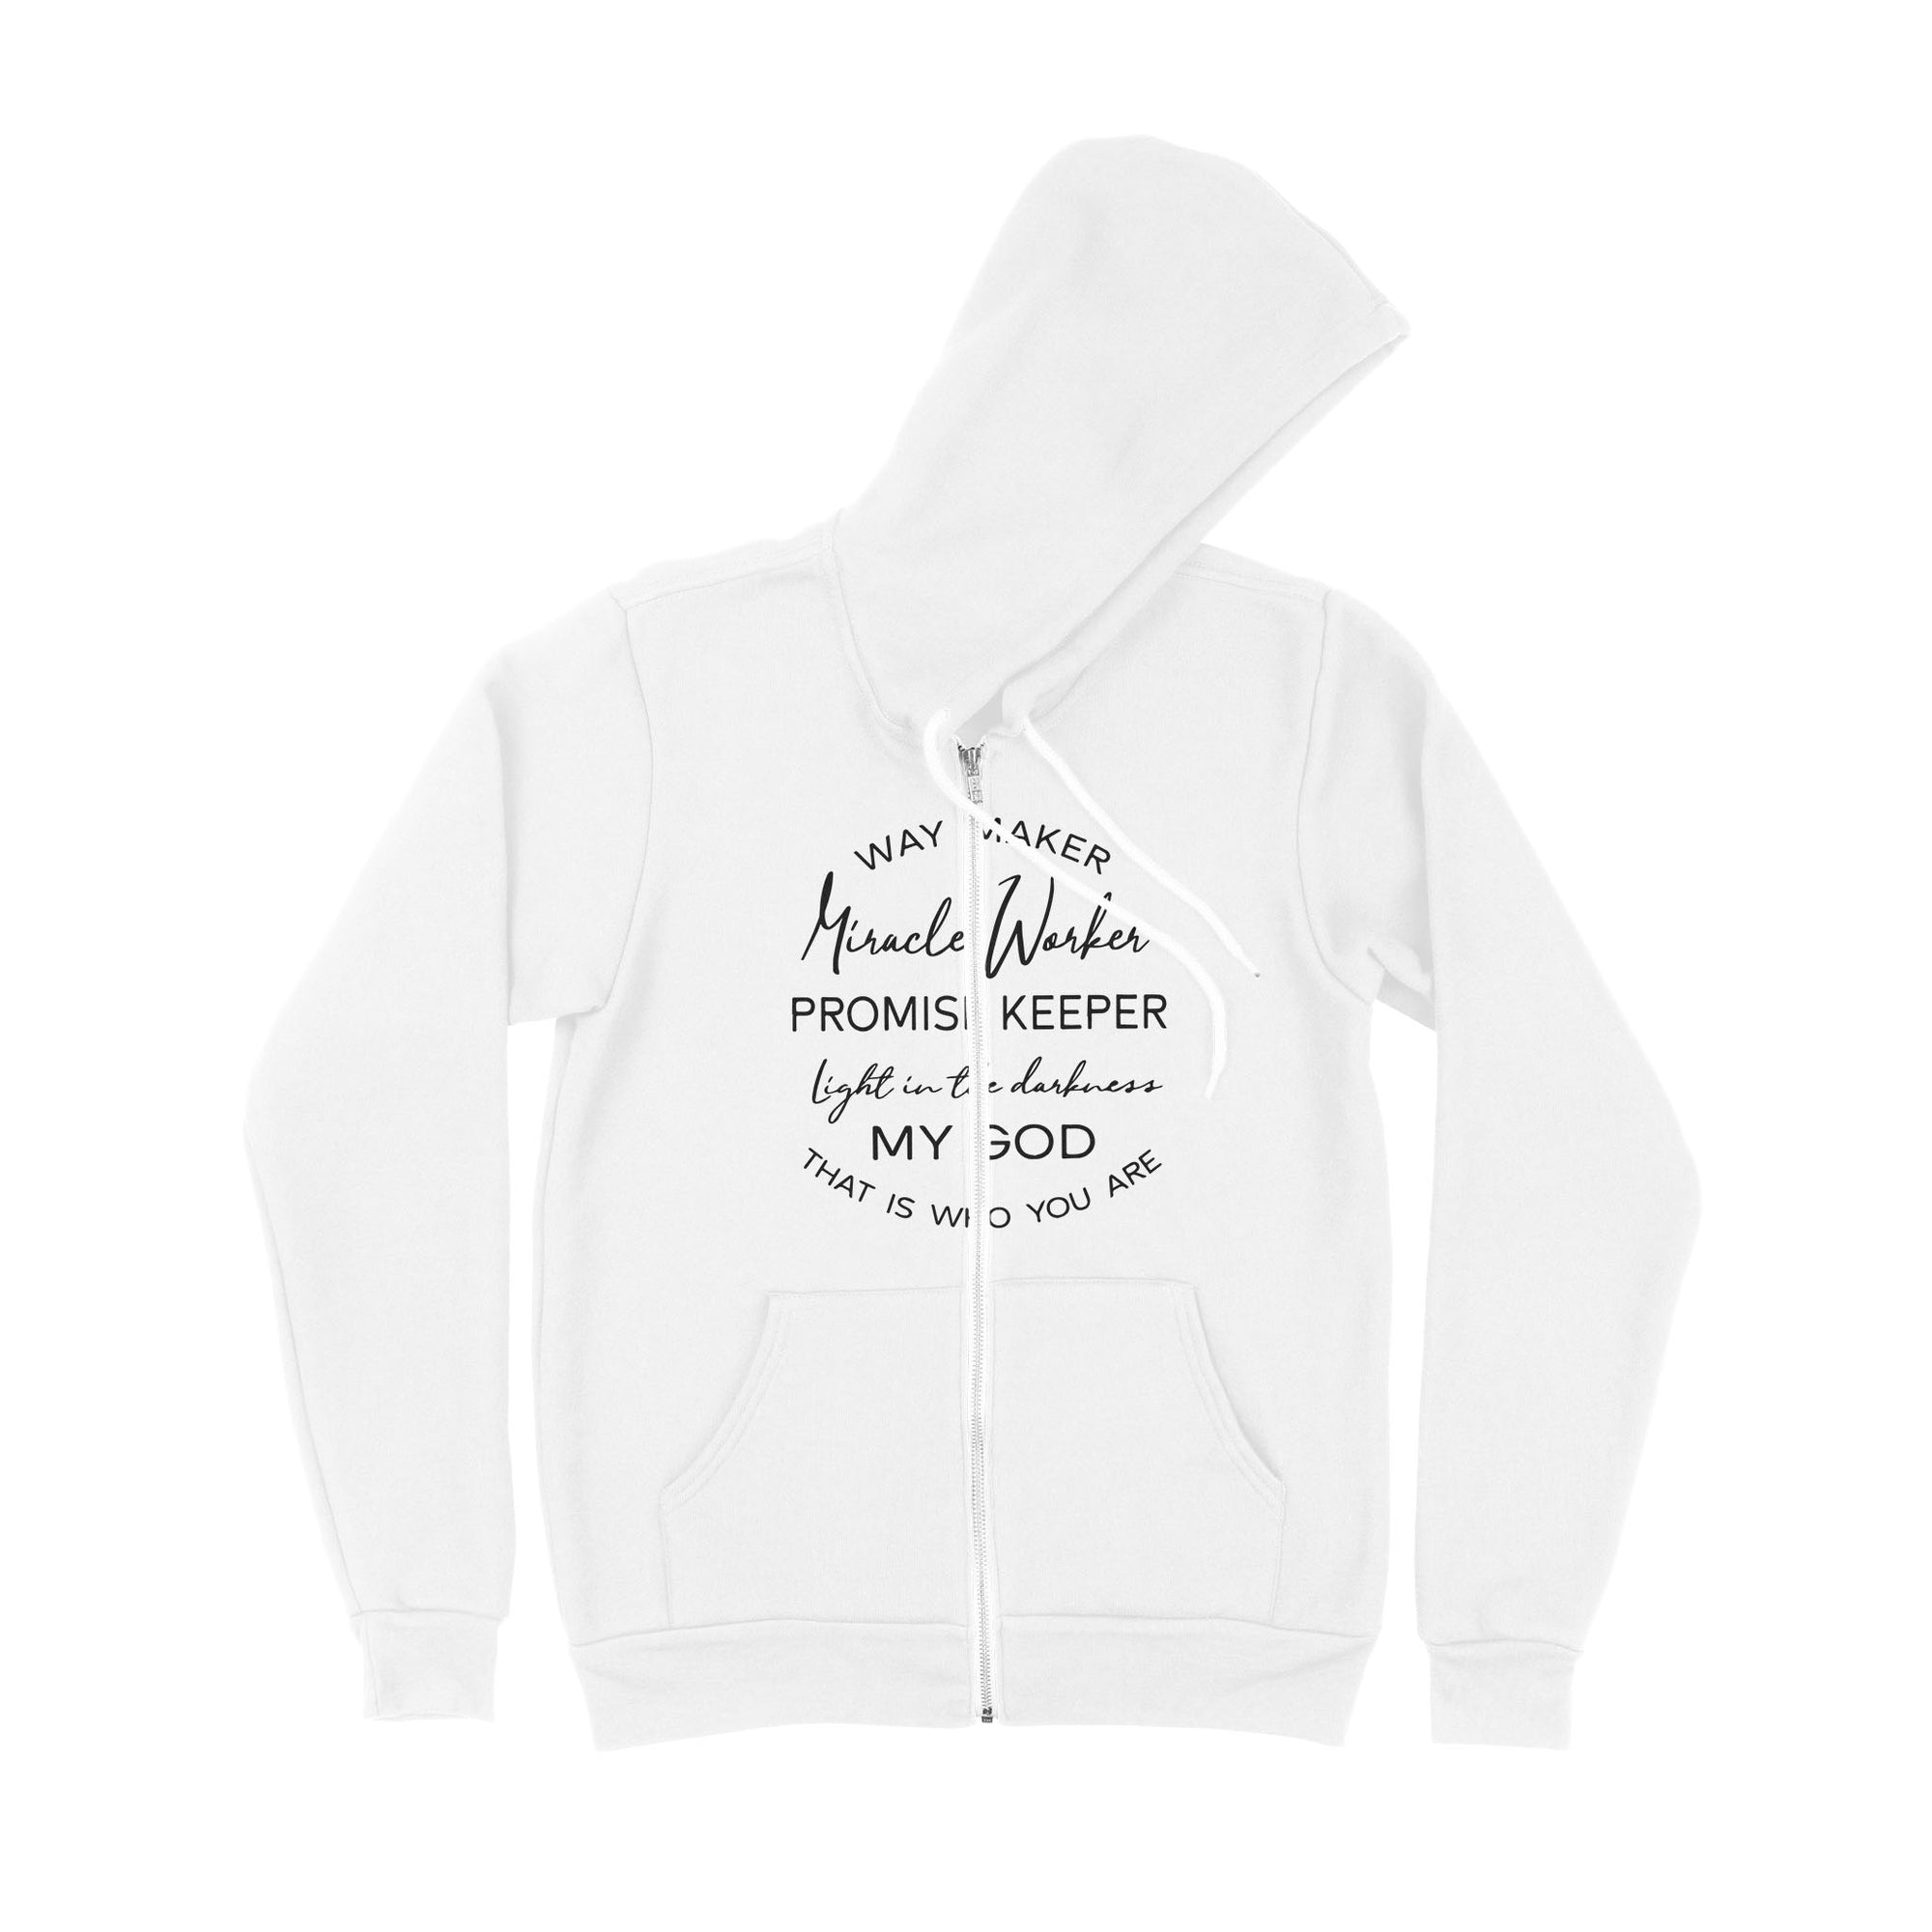 Way Maker Miracle Worker Promise Keeper Light In The Darkness My God That Is Who You Are - Premium Zip Hoodie